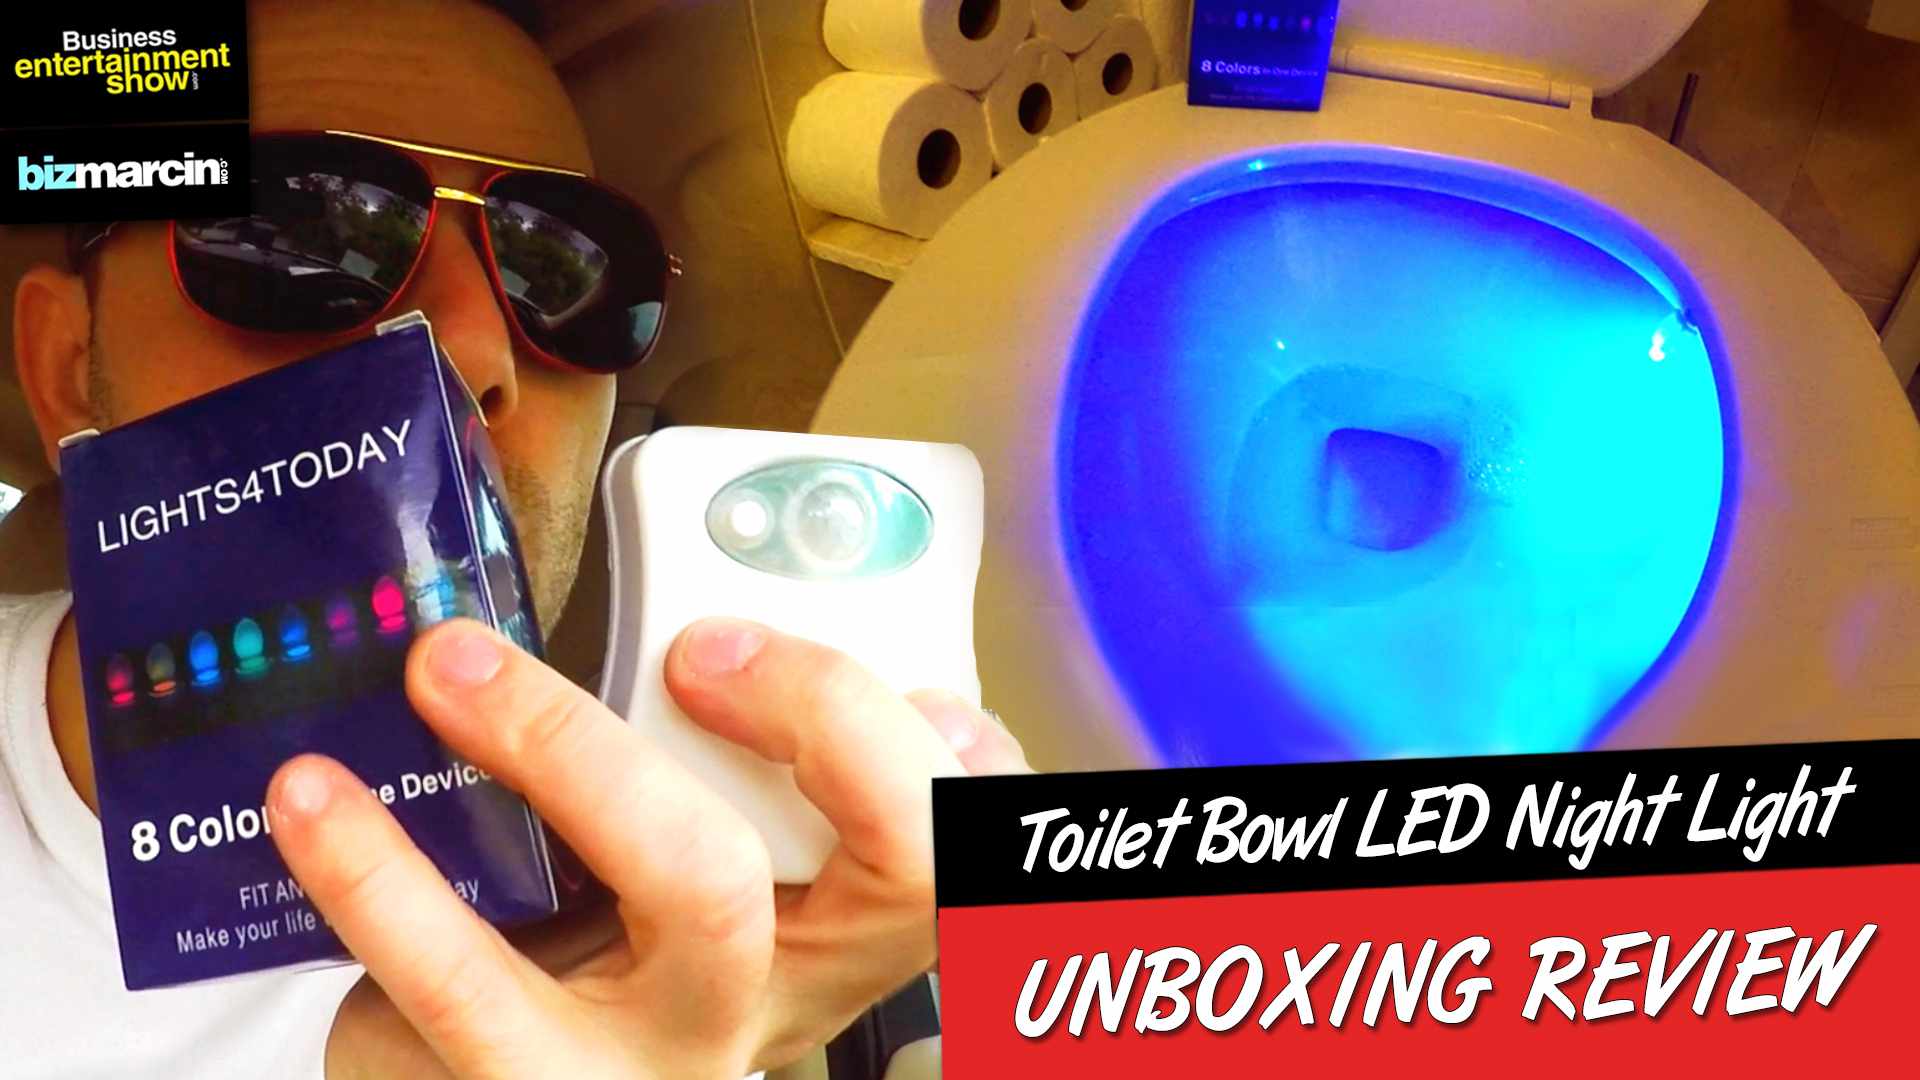 Toilet Bowl LED Night Light - UNBOXING Review  ( LIGHTS4TODAY with Rene Liaw Trailer)